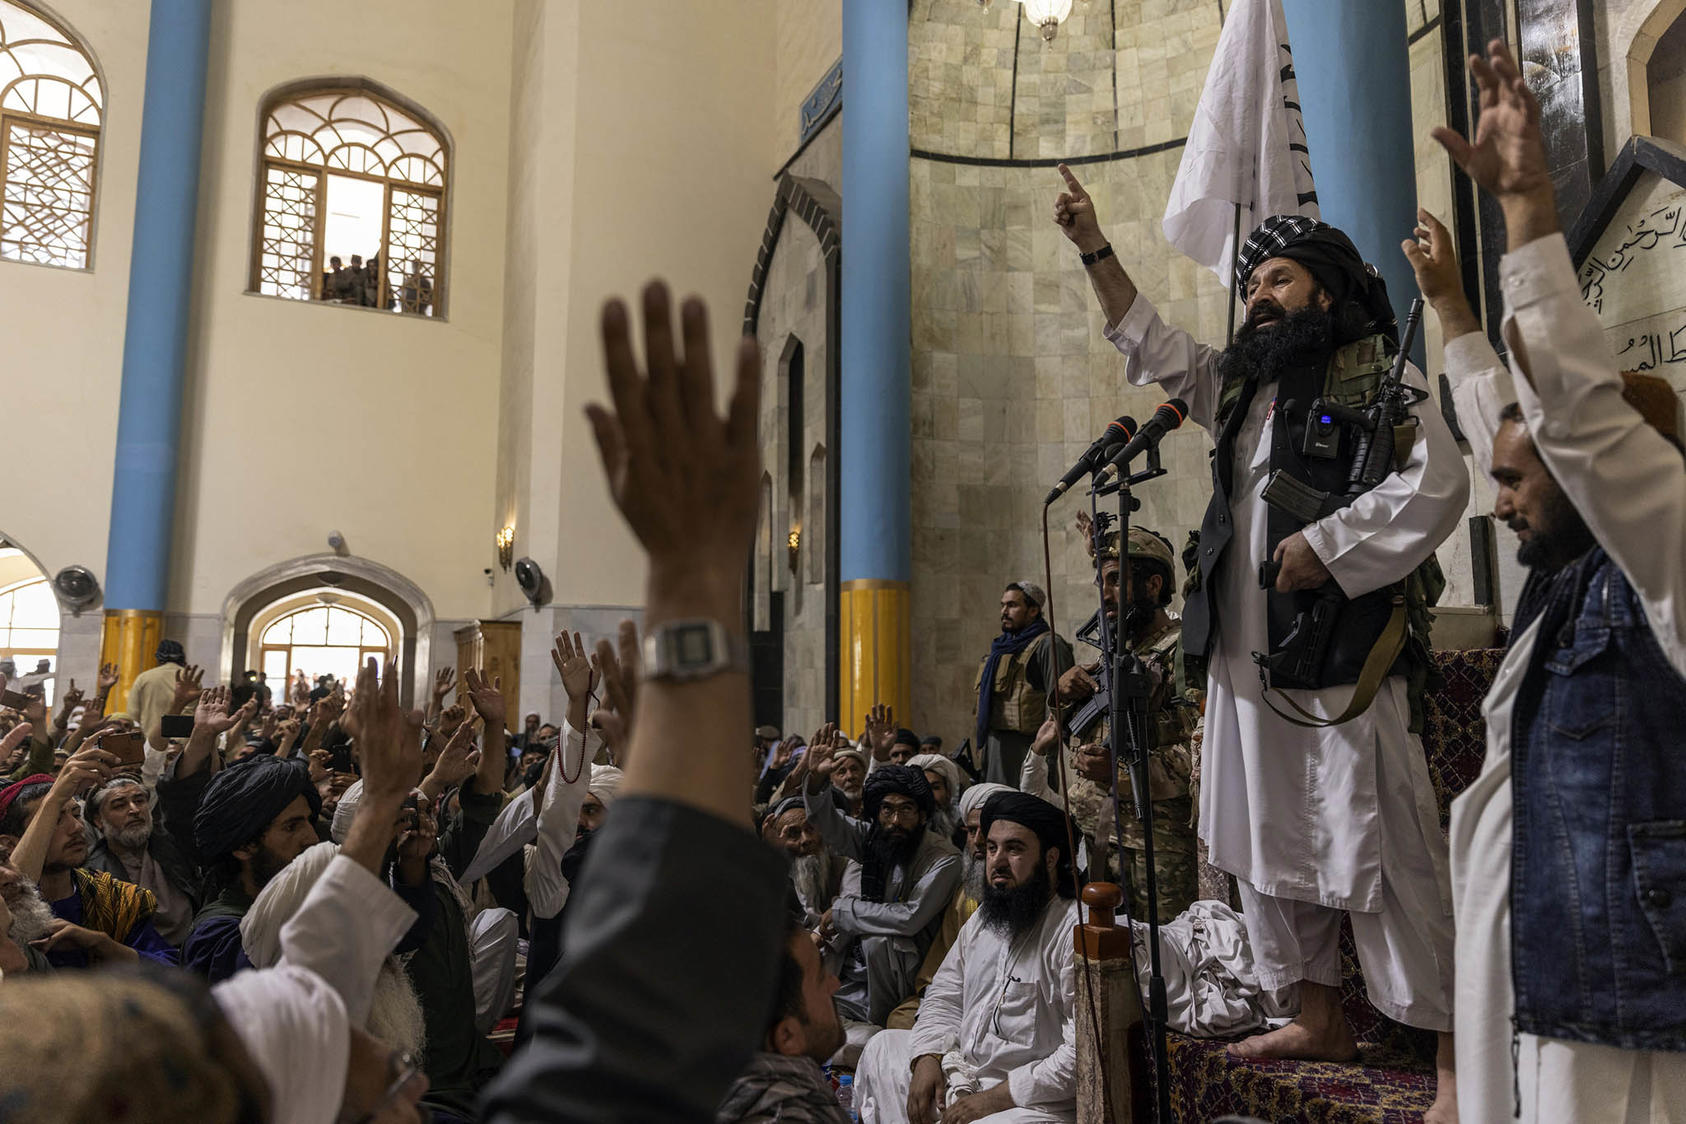 The Taliban’s acting minister of refugees, Khalil Haqqani, speaks in Kabul on Aug. 20, 2021. (Victor J. Blue/The New York Times)